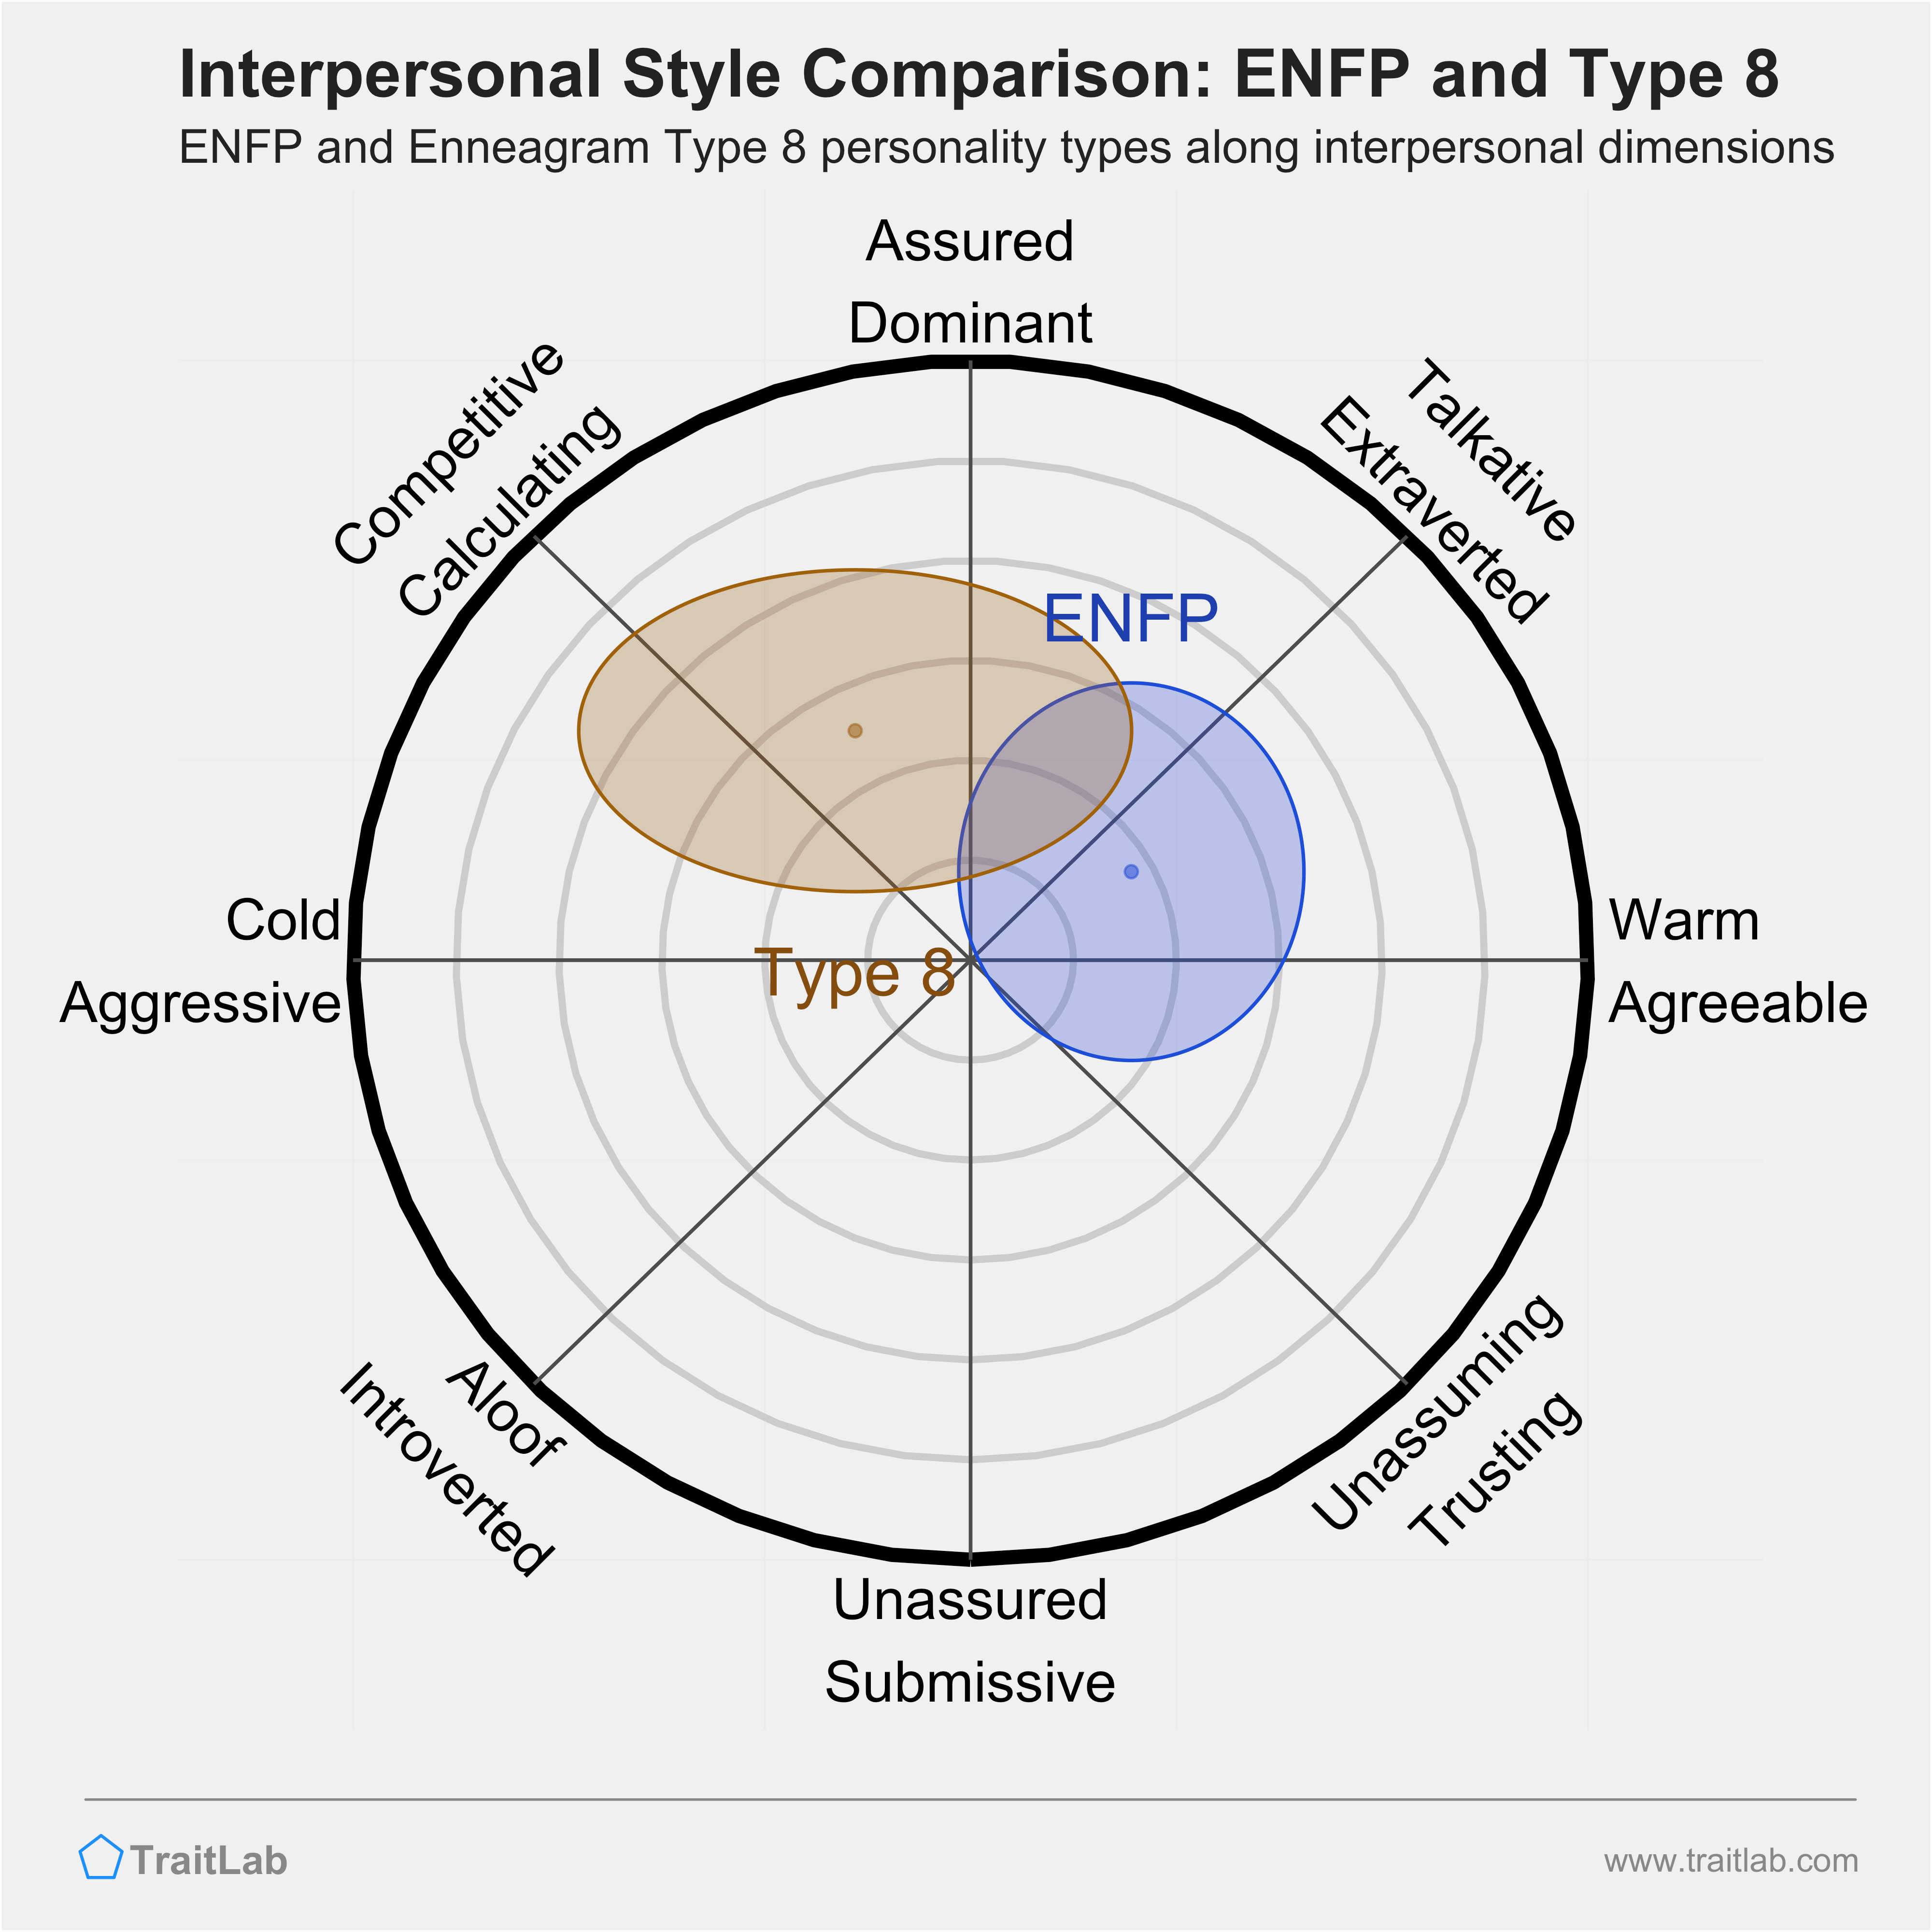 Enneagram ENFP and Type 8 comparison across interpersonal dimensions